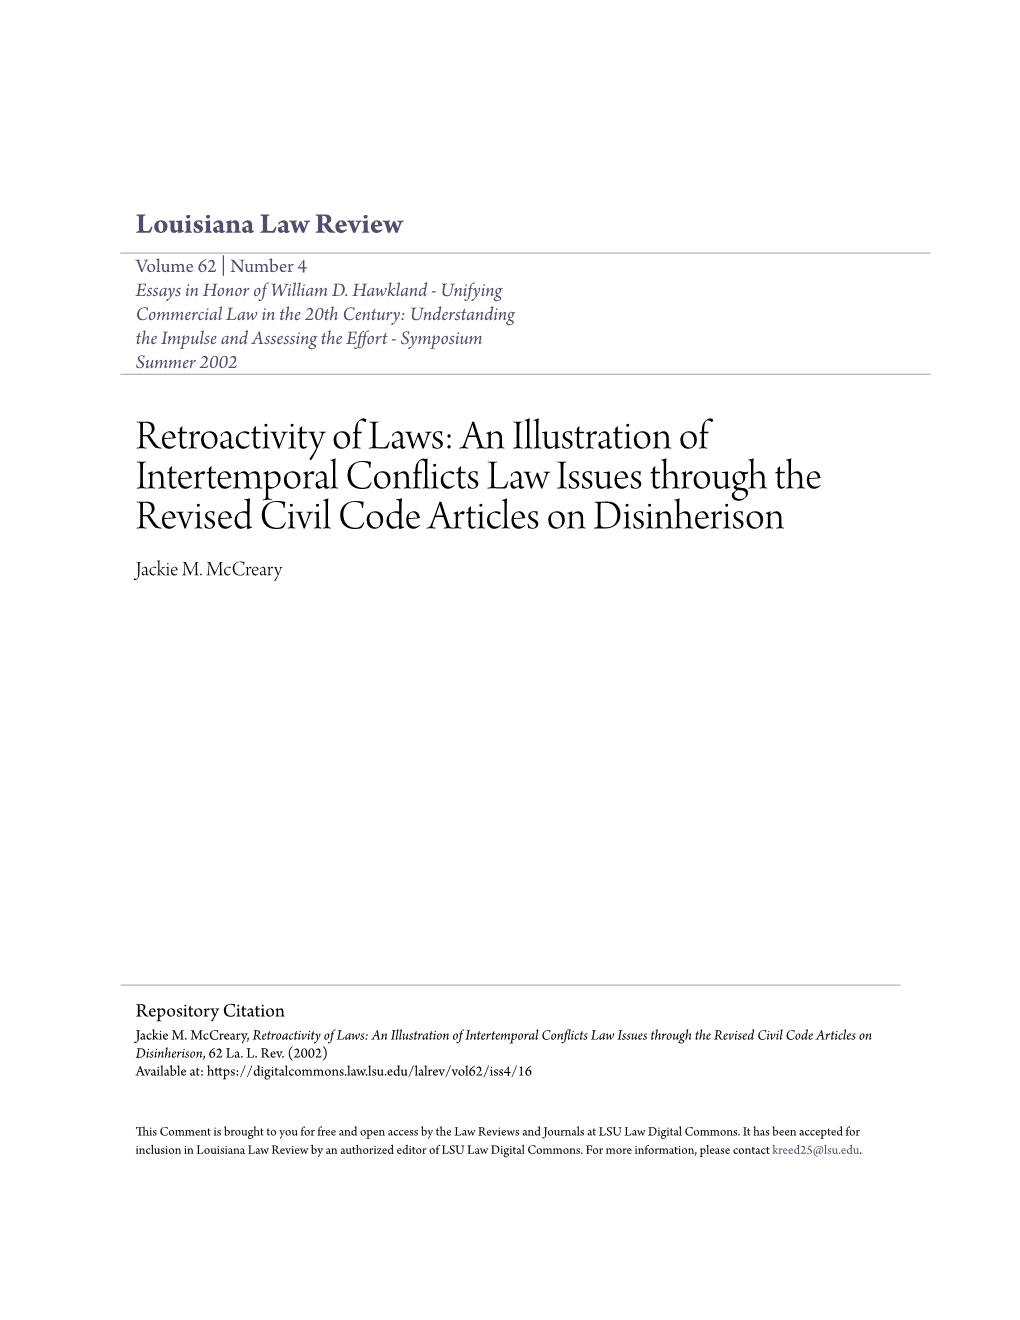 Retroactivity of Laws: an Illustration of Intertemporal Conflicts Law Issues Through the Revised Civil Code Articles on Disinherison Jackie M